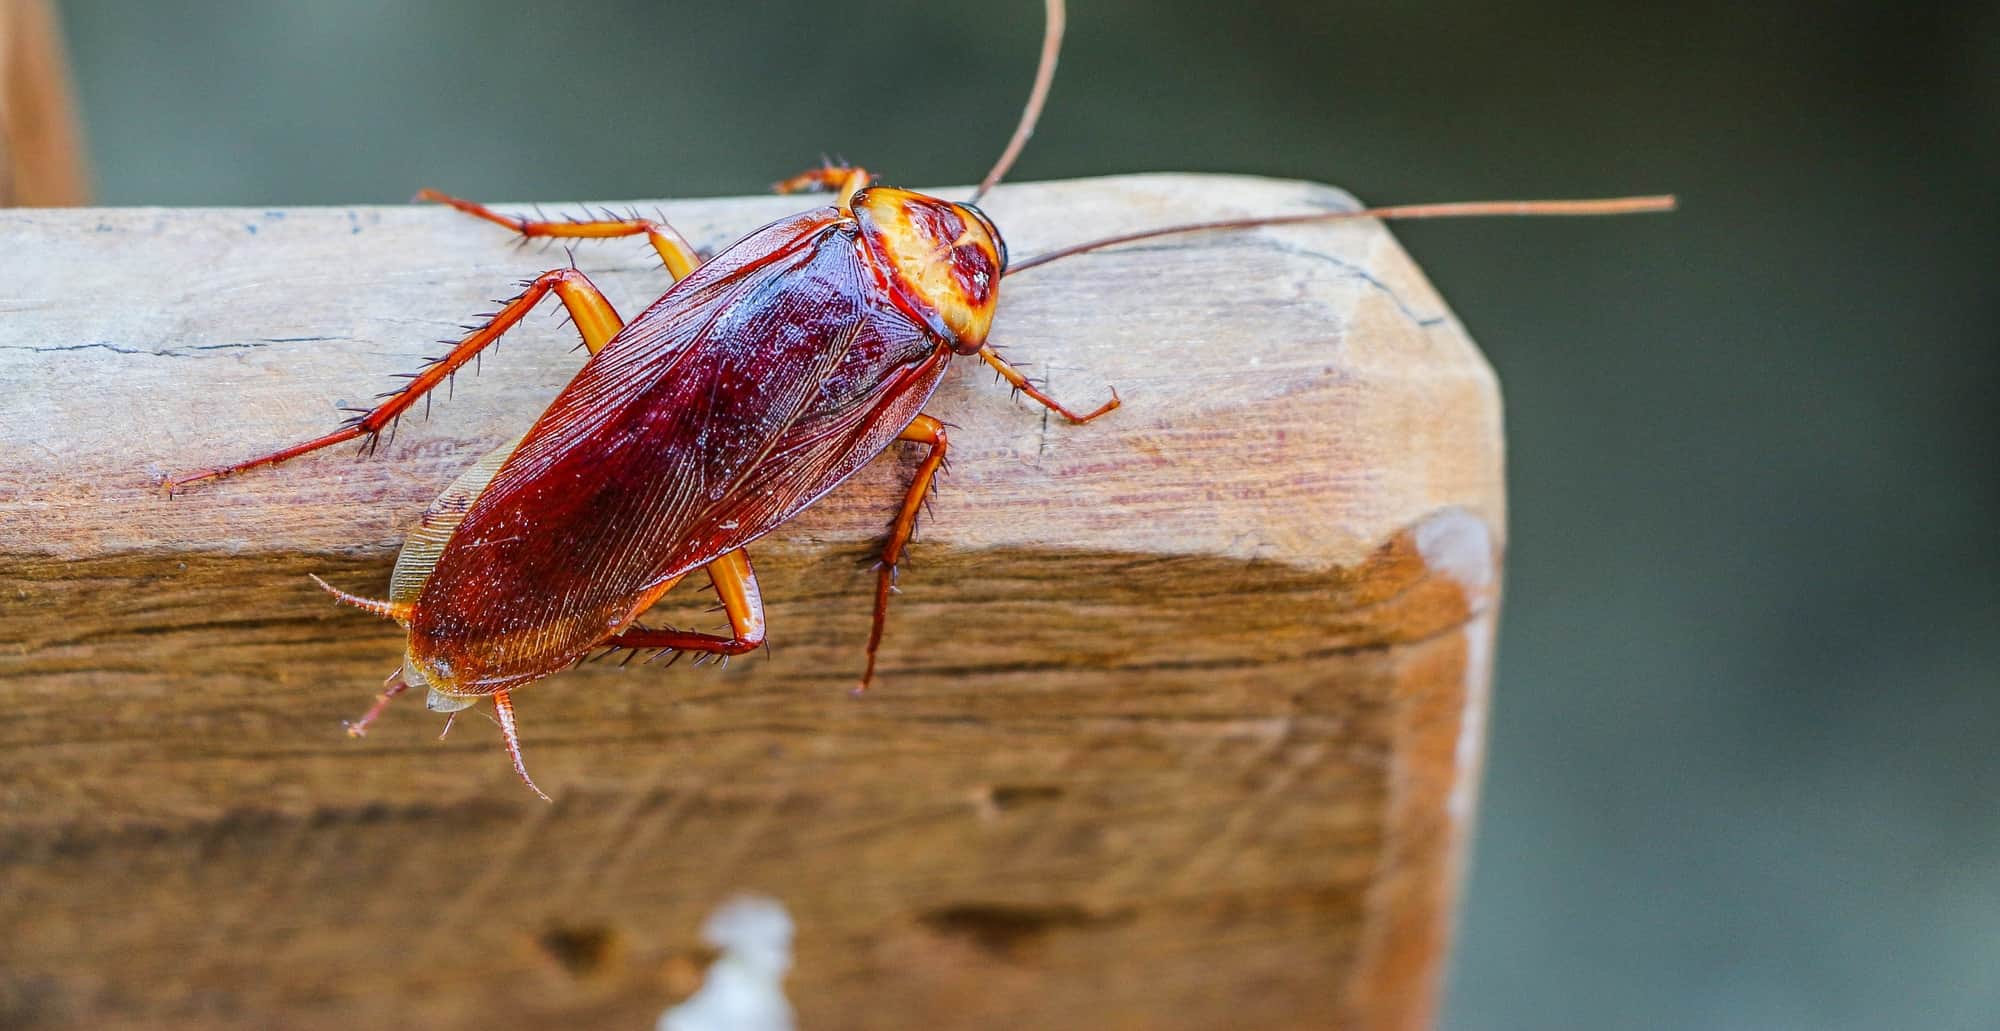 How To Get Rid Of Outdoor Roaches